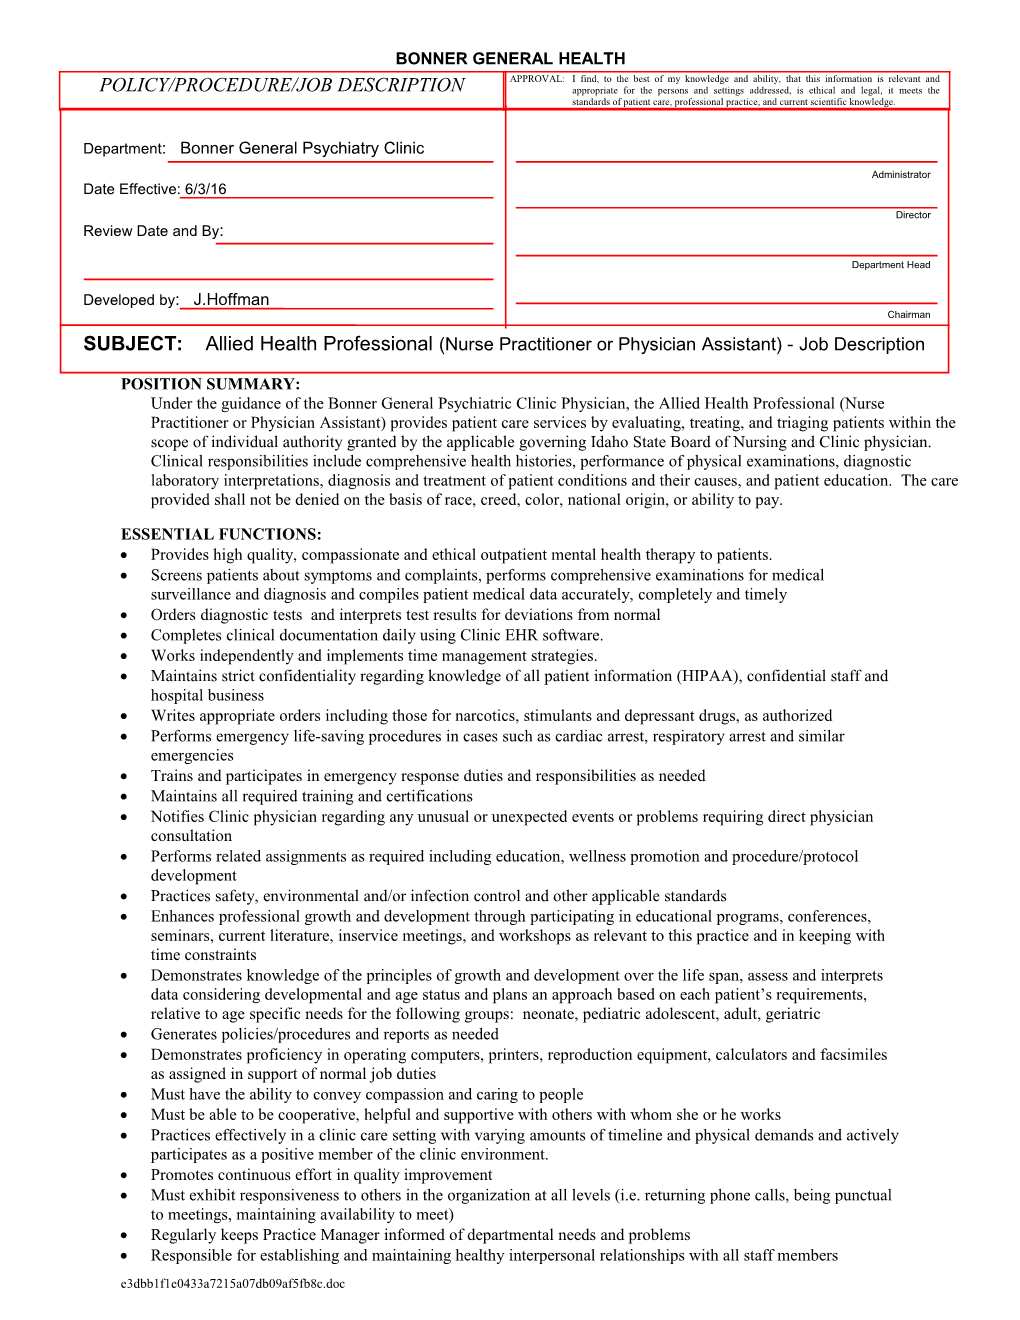 Subject:Allied Health Professional (Nurse Practitioner Or Physician Assistant) - Clinic